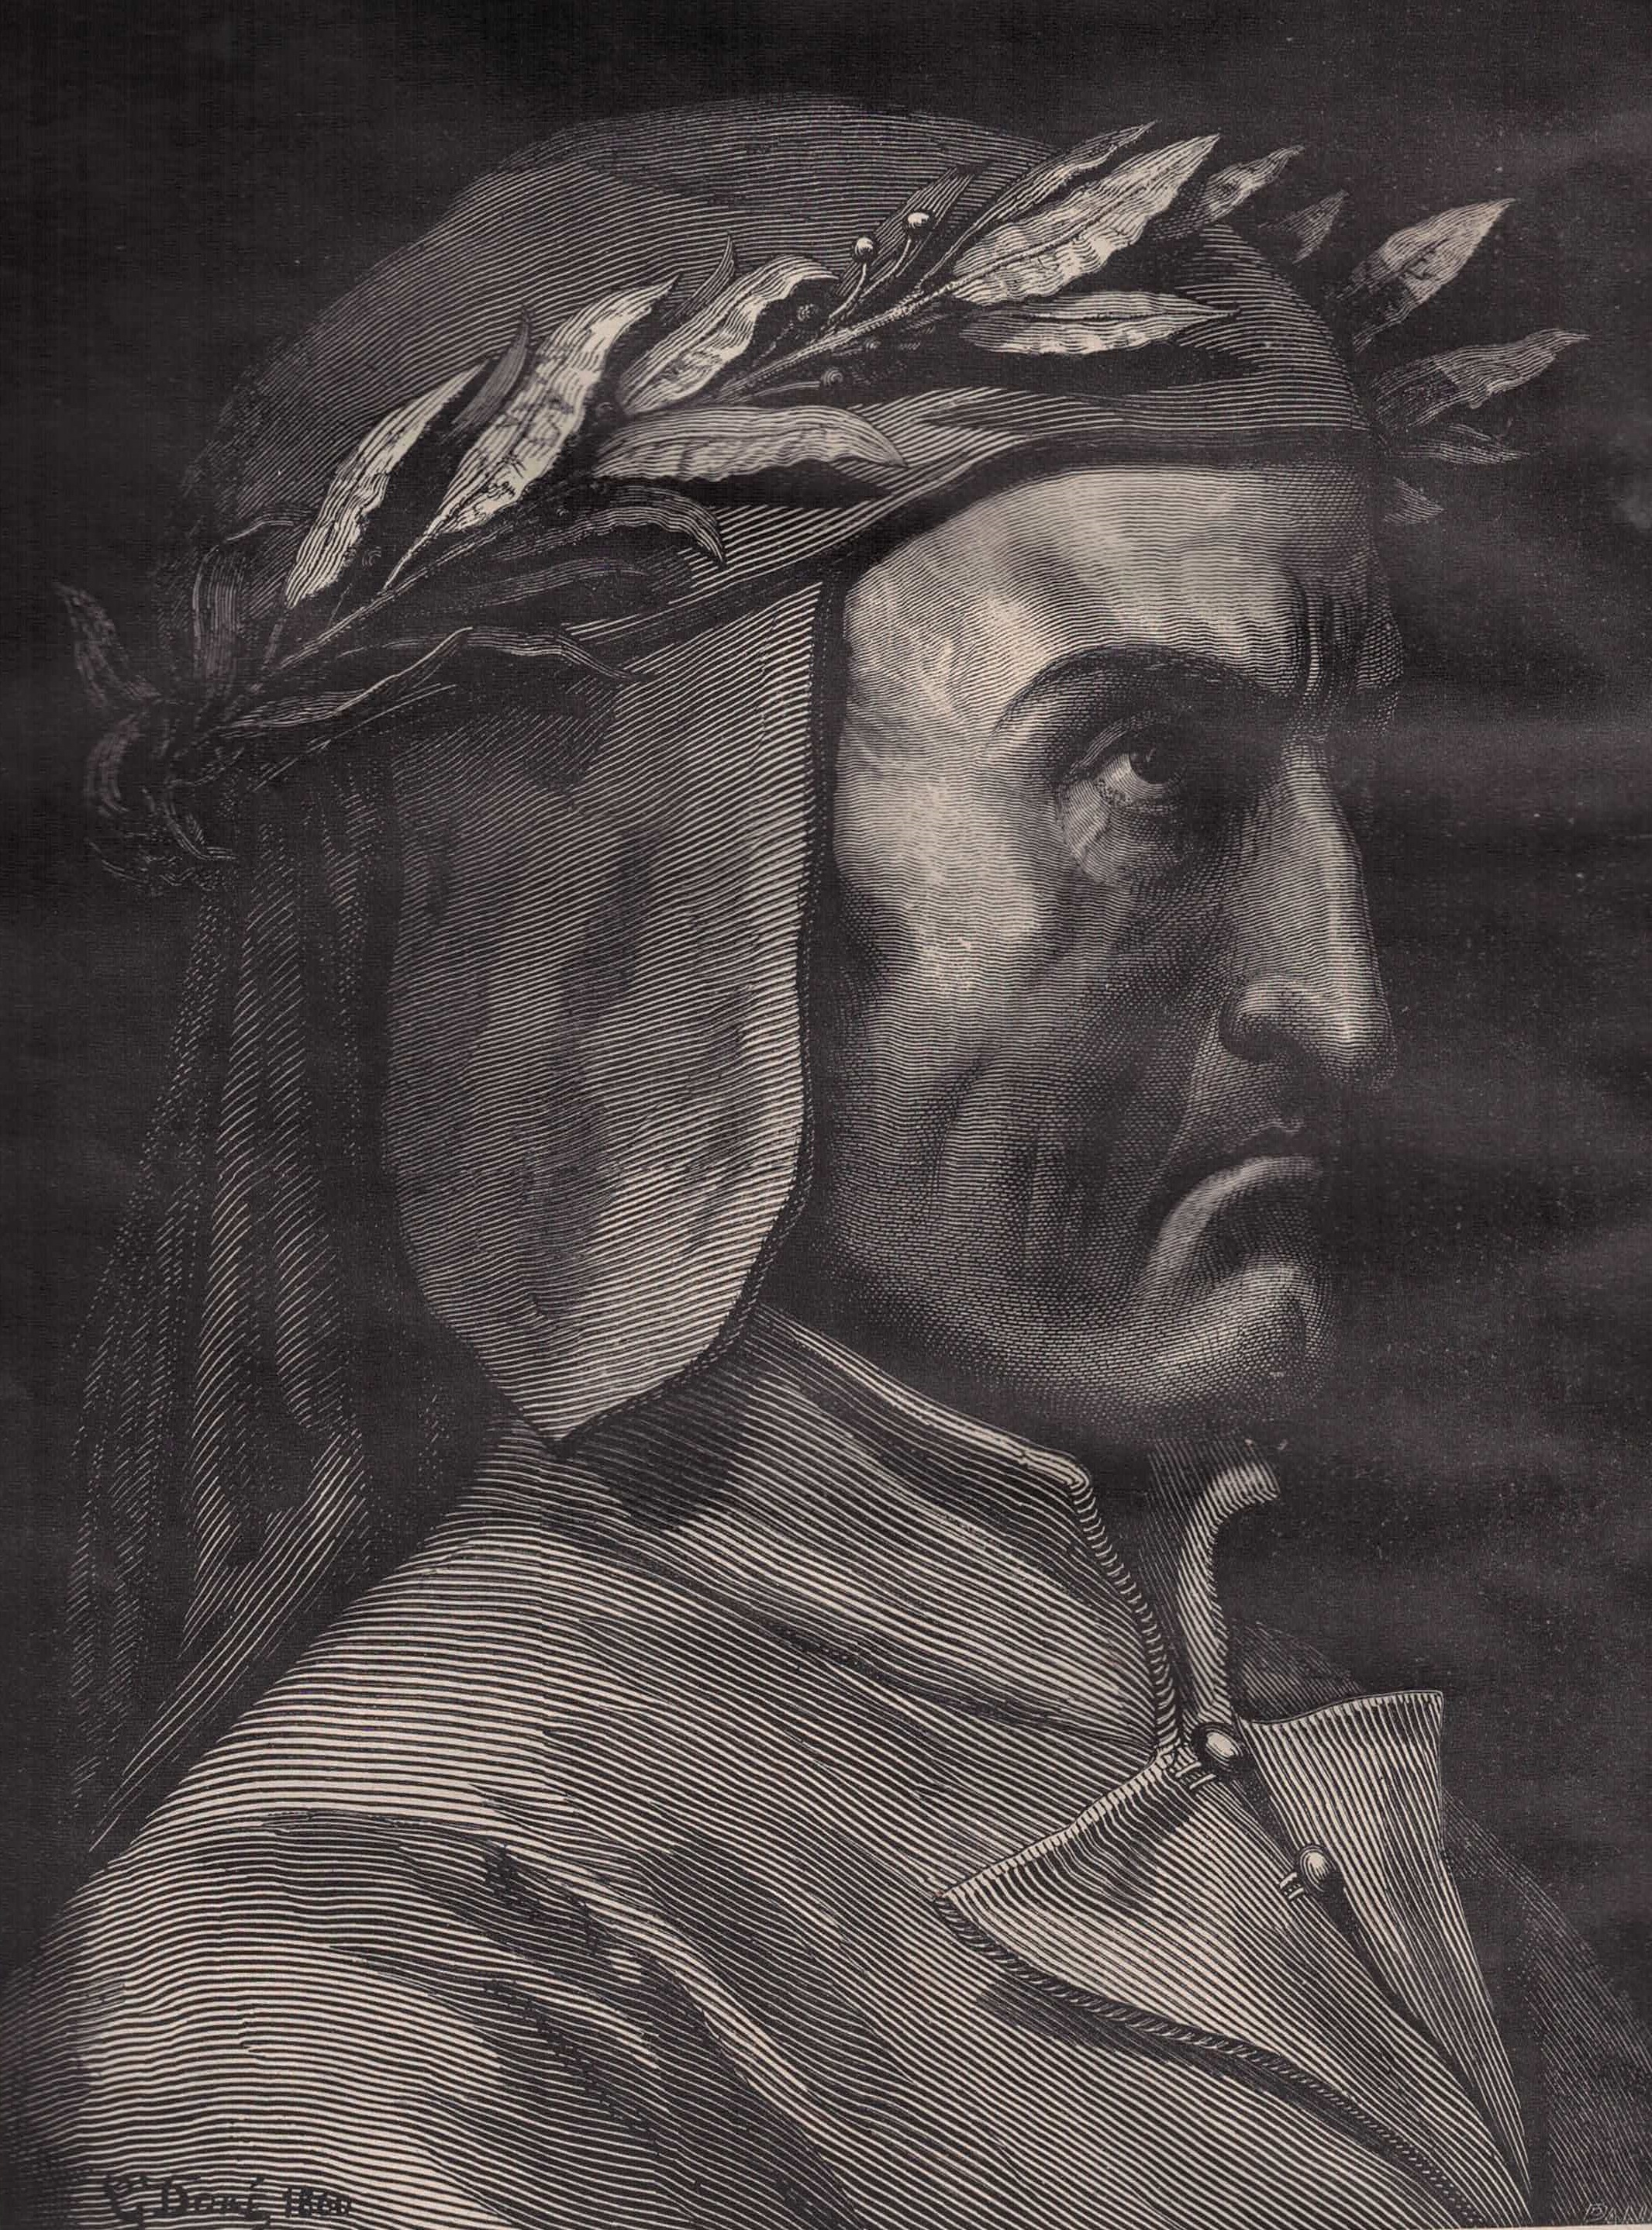 A black and white drawing of the Italian poet Dante Alighieri in profile.